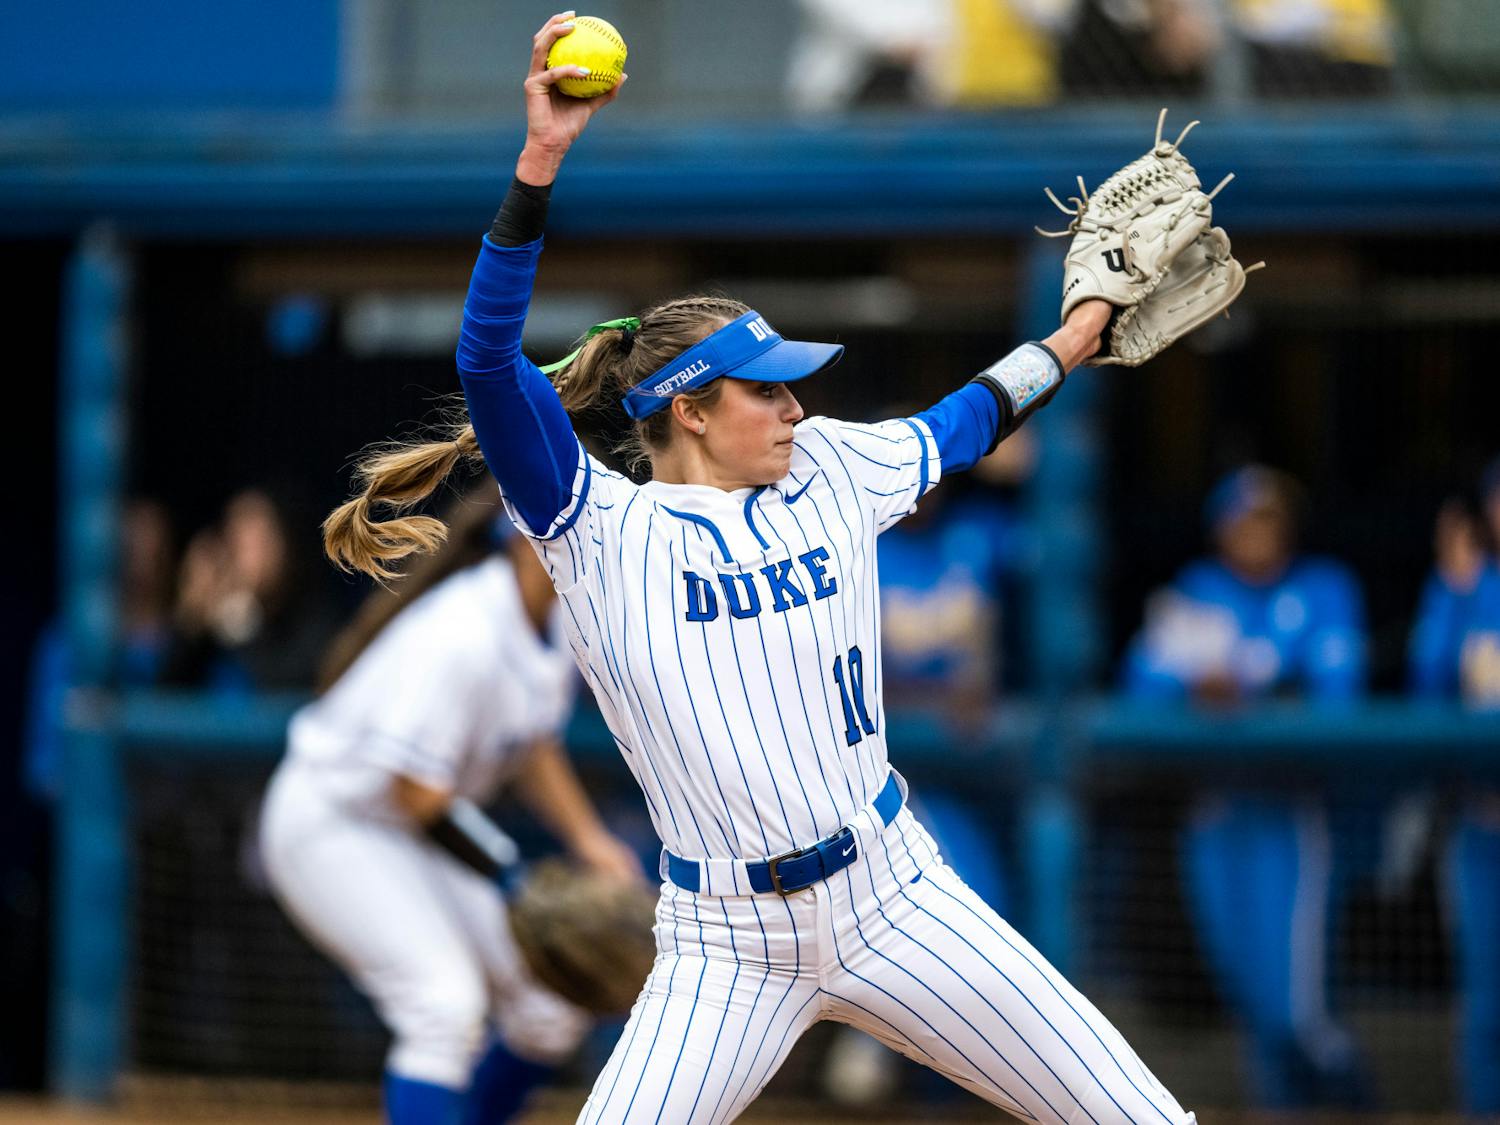 Despite a steady performance from Peyton St. George, Duke's season came to an end Saturday against UCLA.